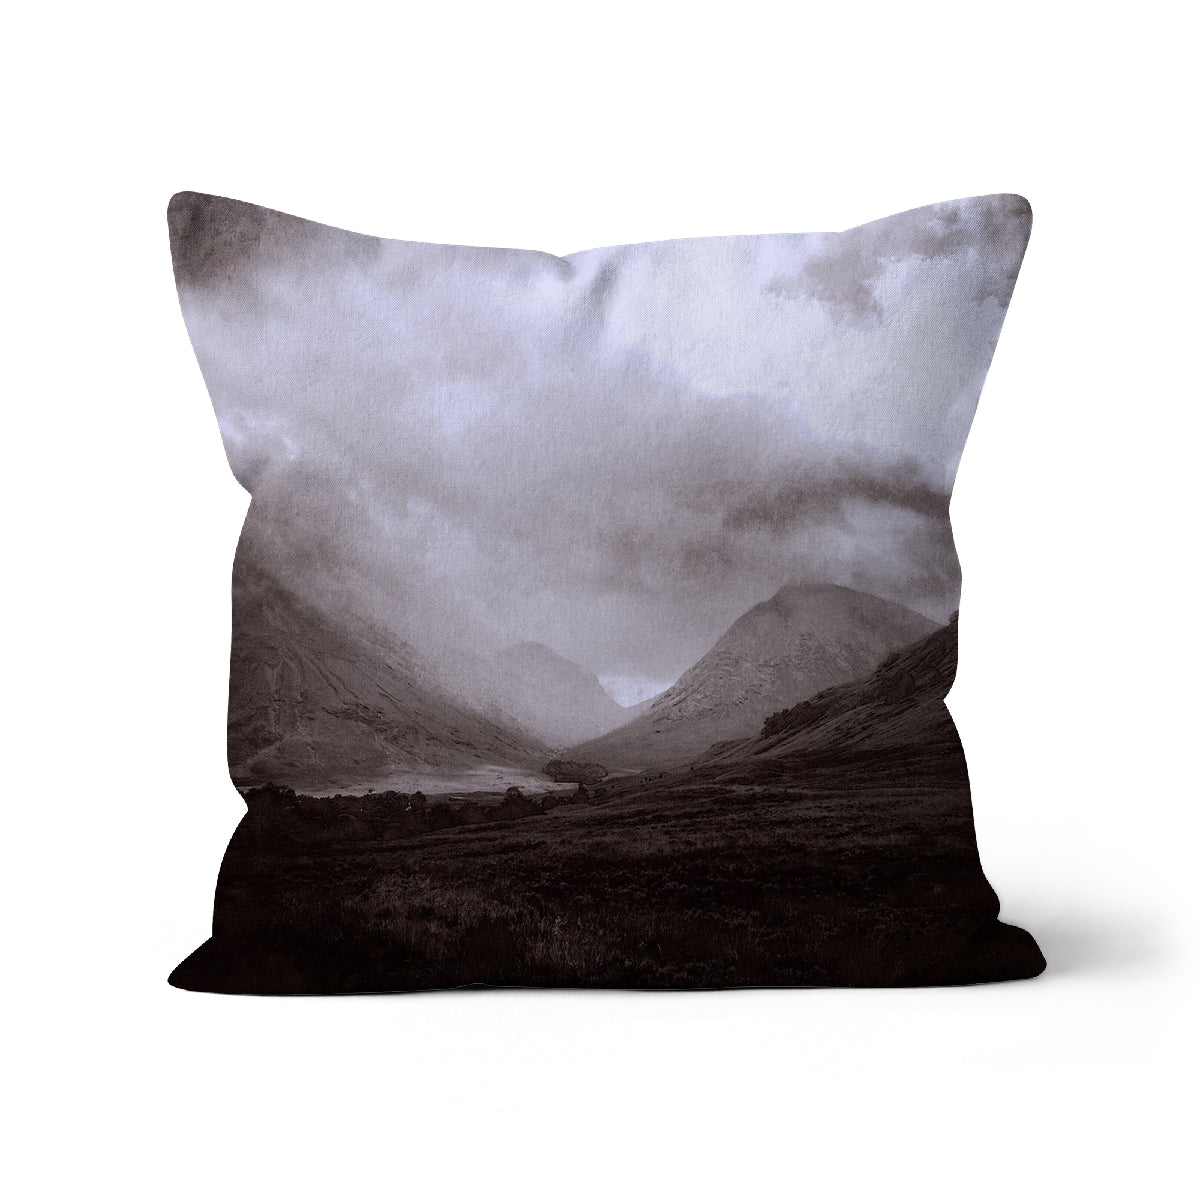 Glencoe Mist Art Gifts Cushion-Cushions-Glencoe Art Gallery-Faux Suede-16"x16"-Paintings, Prints, Homeware, Art Gifts From Scotland By Scottish Artist Kevin Hunter